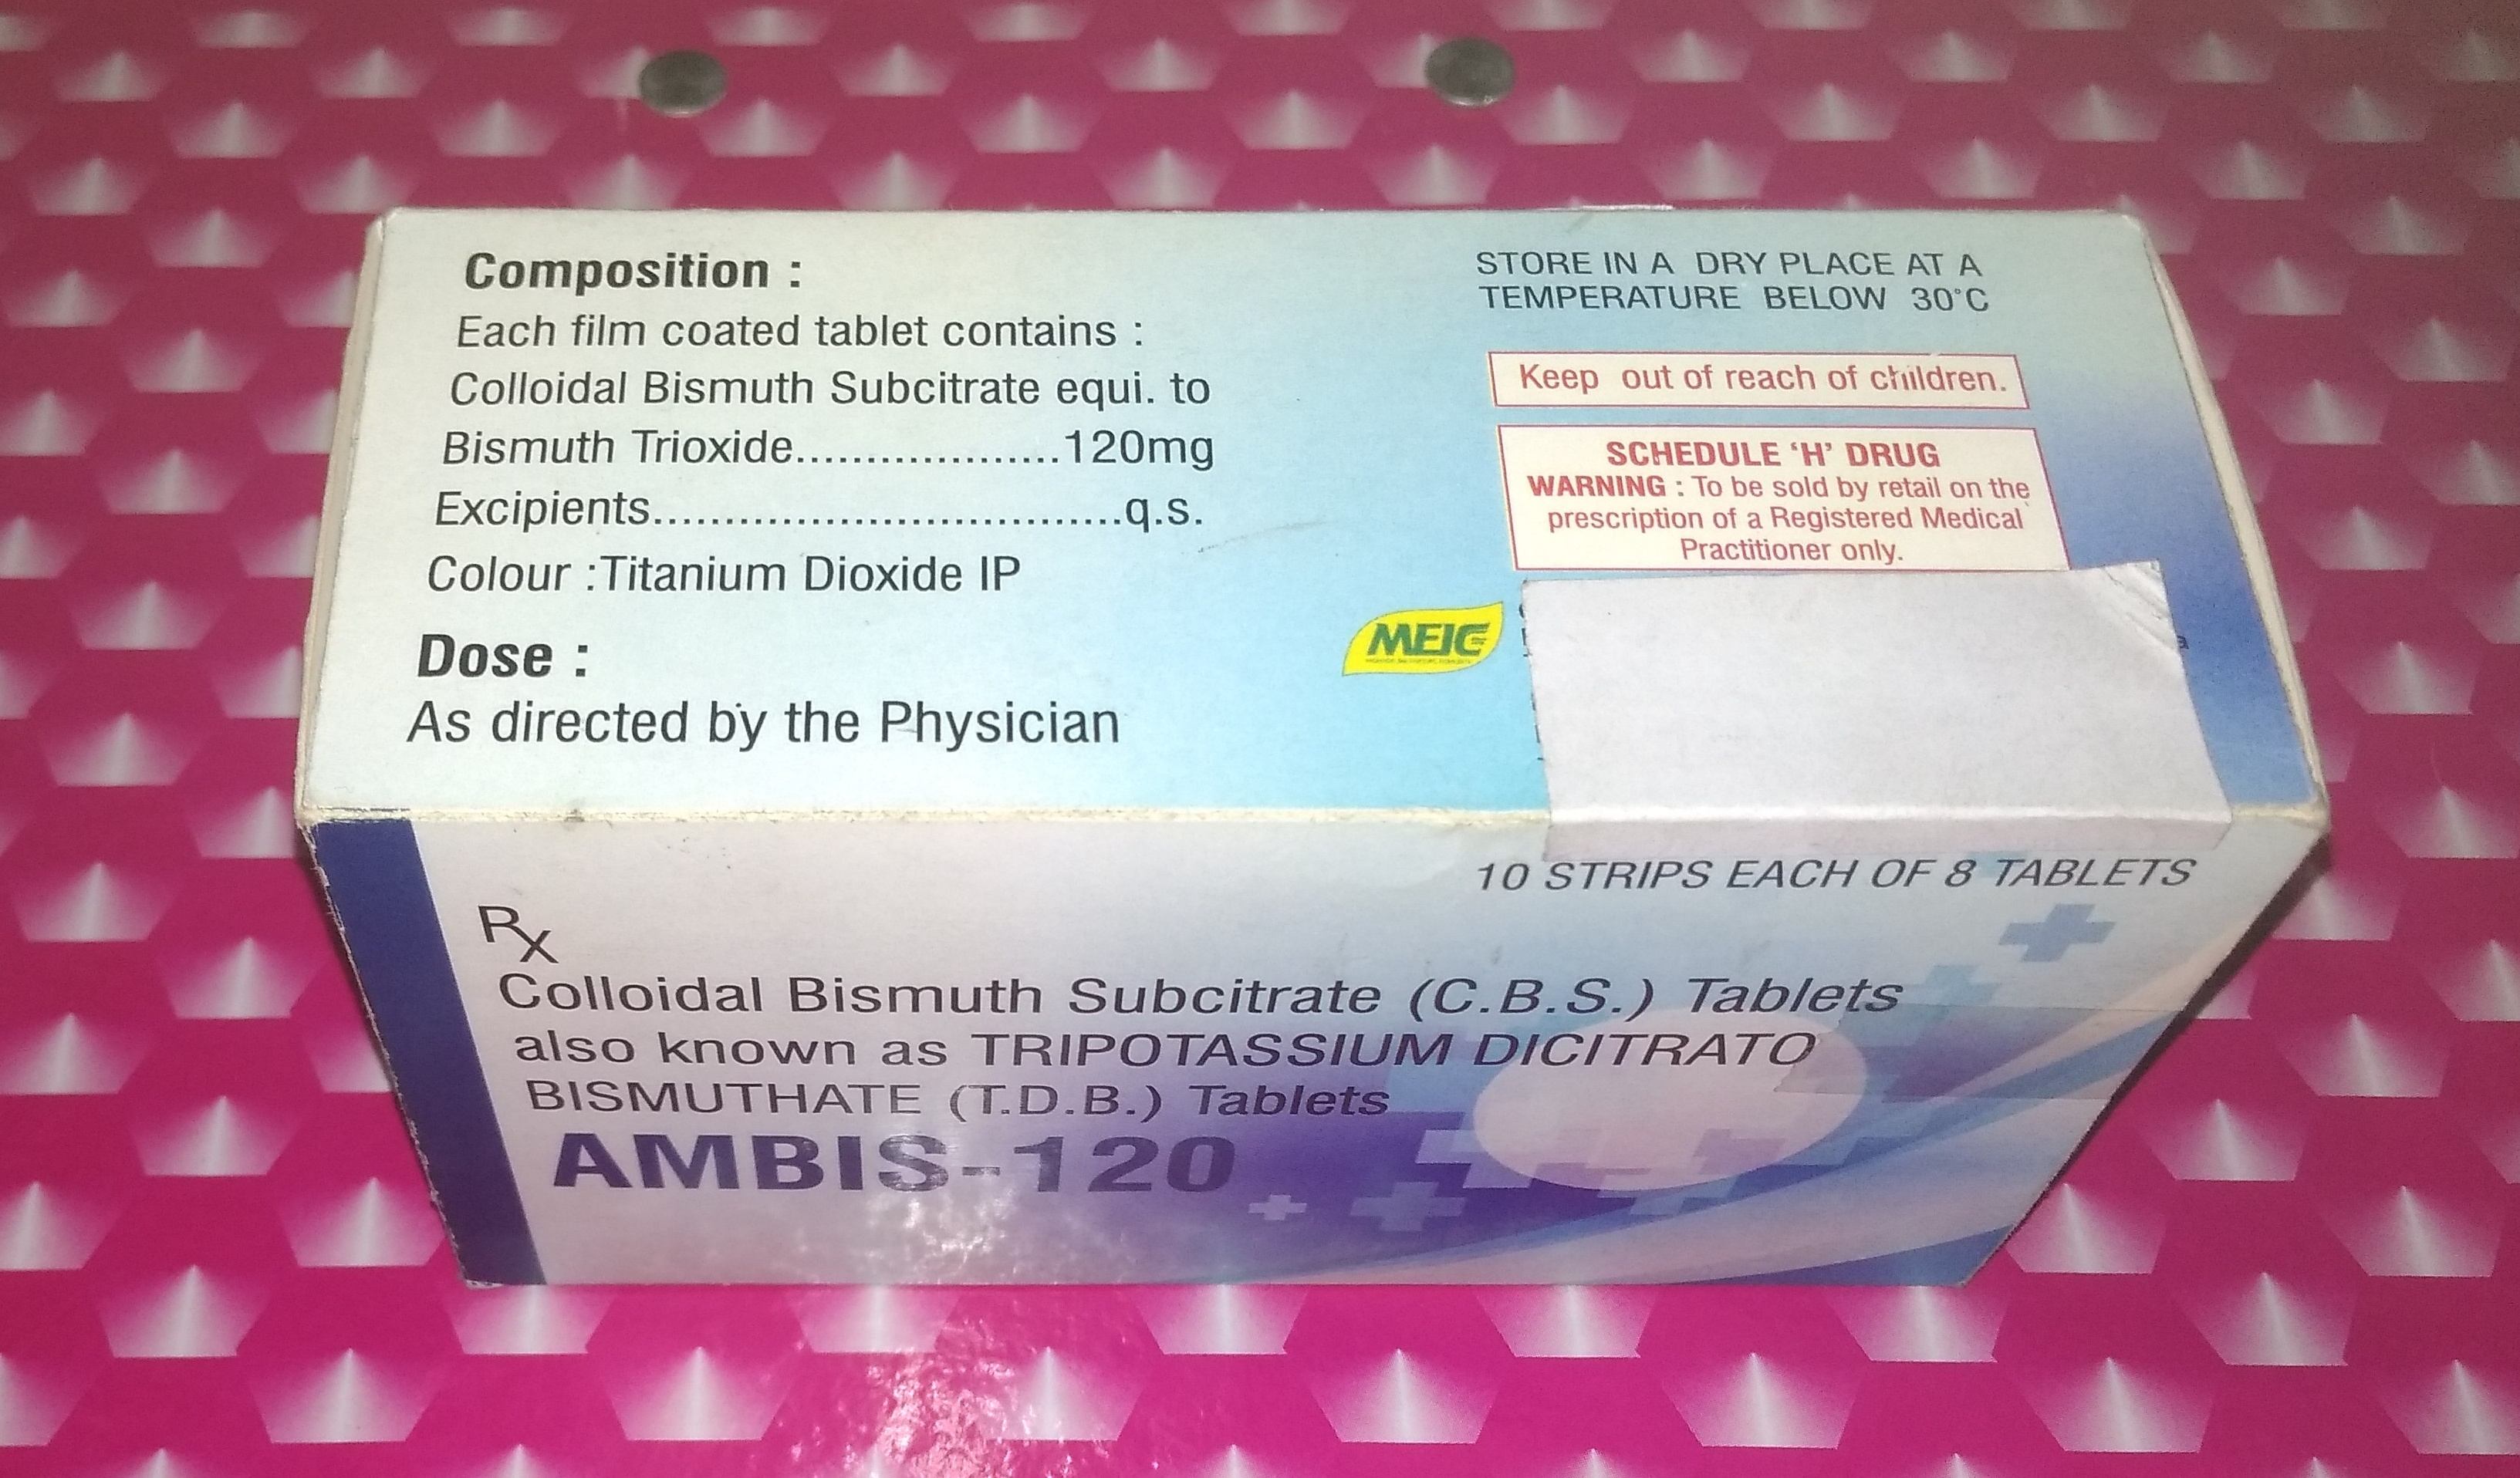 COLLOIDAL BISMUTH SUBCITRATE (C.B.S) TABLETS